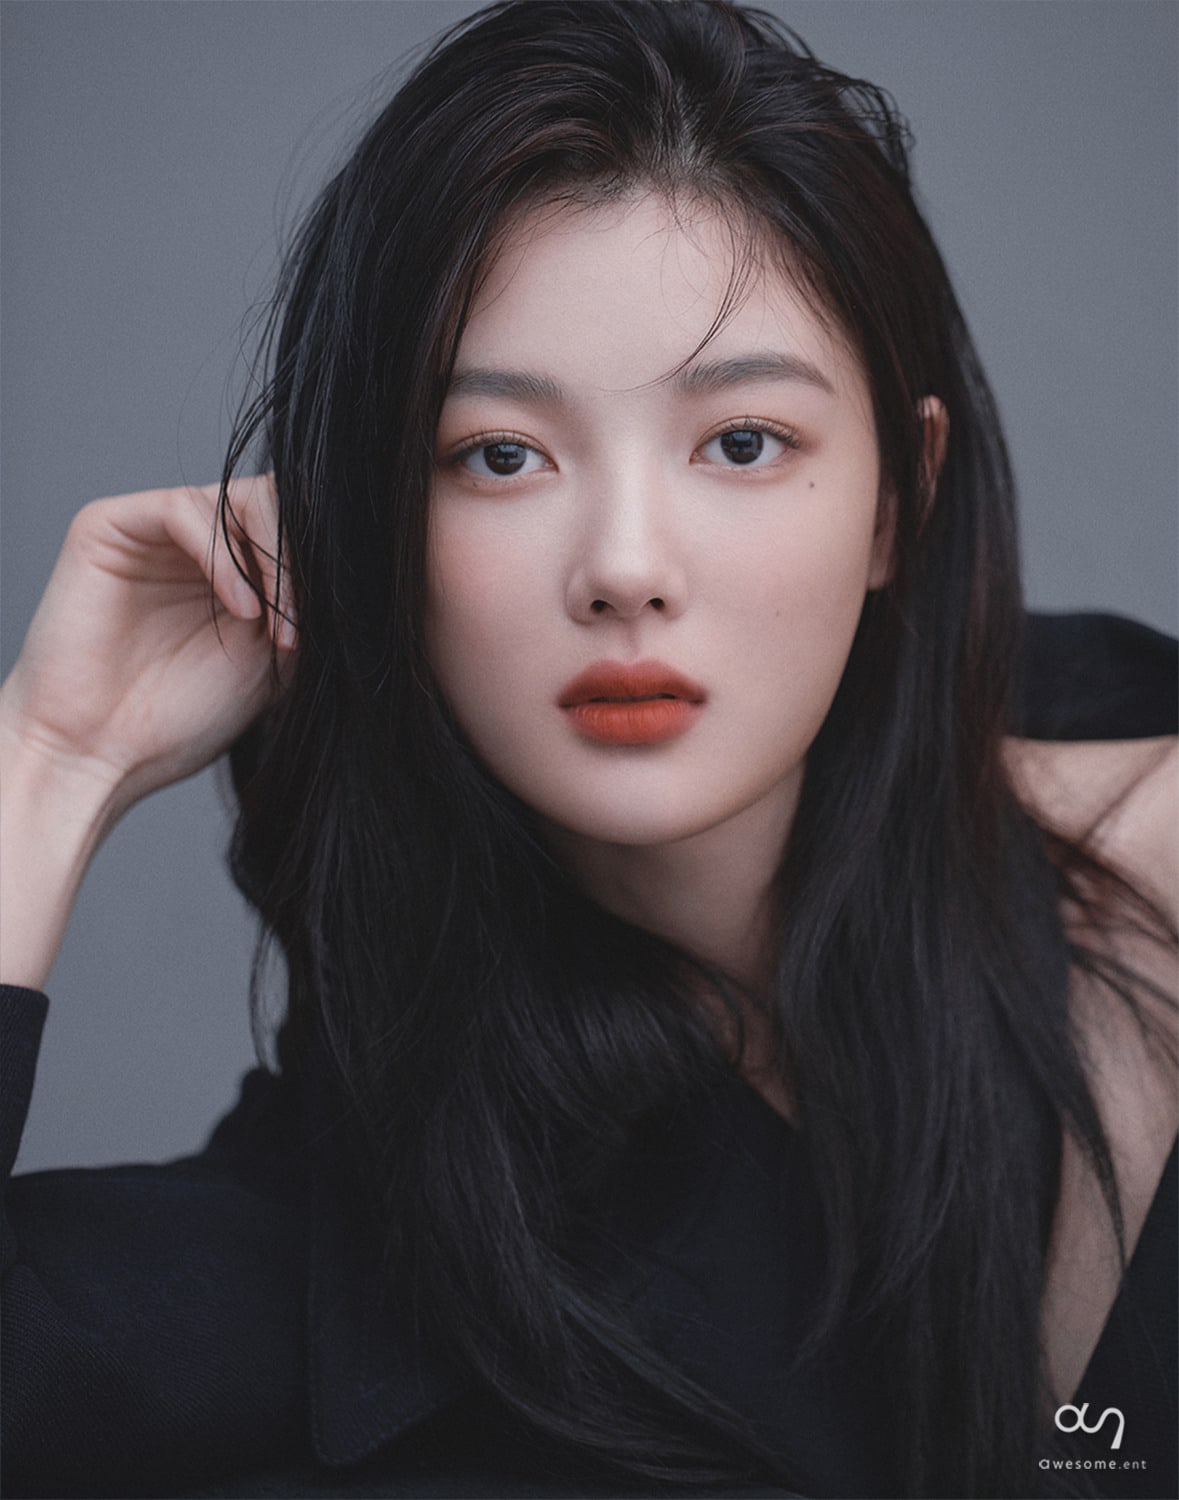 Check out Kim Yoo Jung's Gorgeous Photos from Awesome ENT | KDramaStars